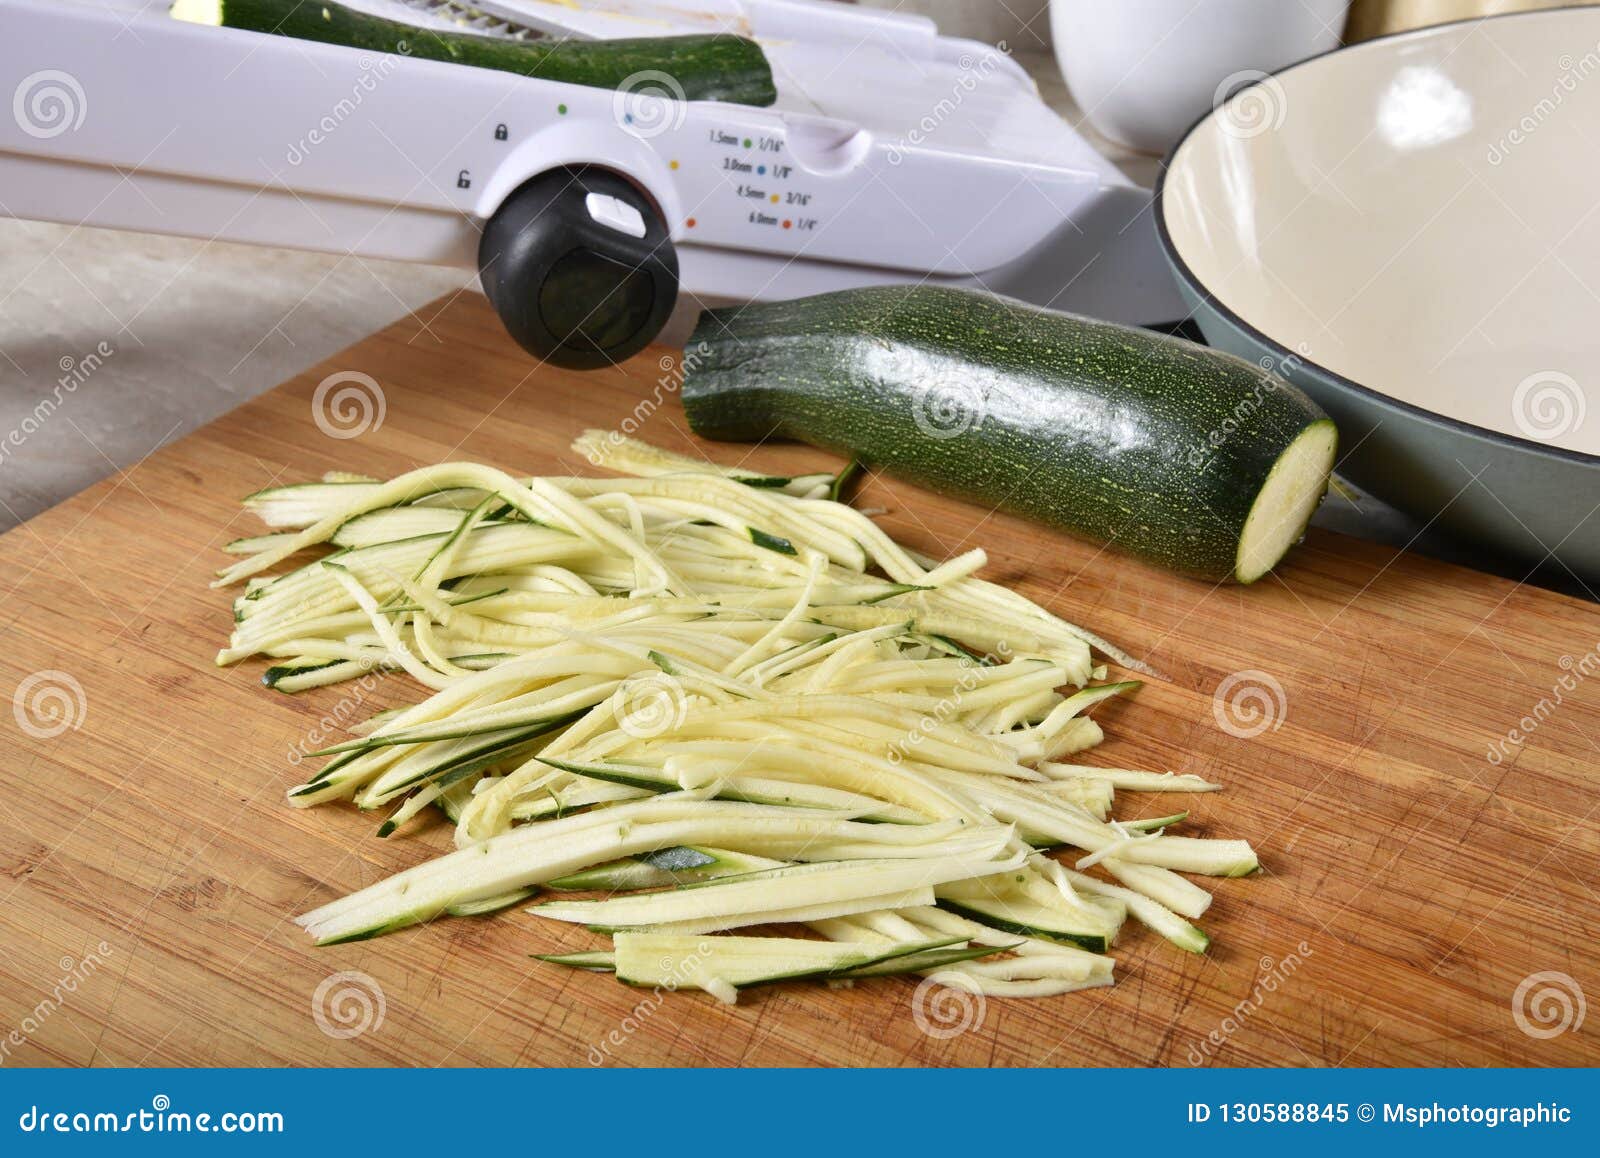 Julienned zucchini squash stock image. Image of board - 130588845